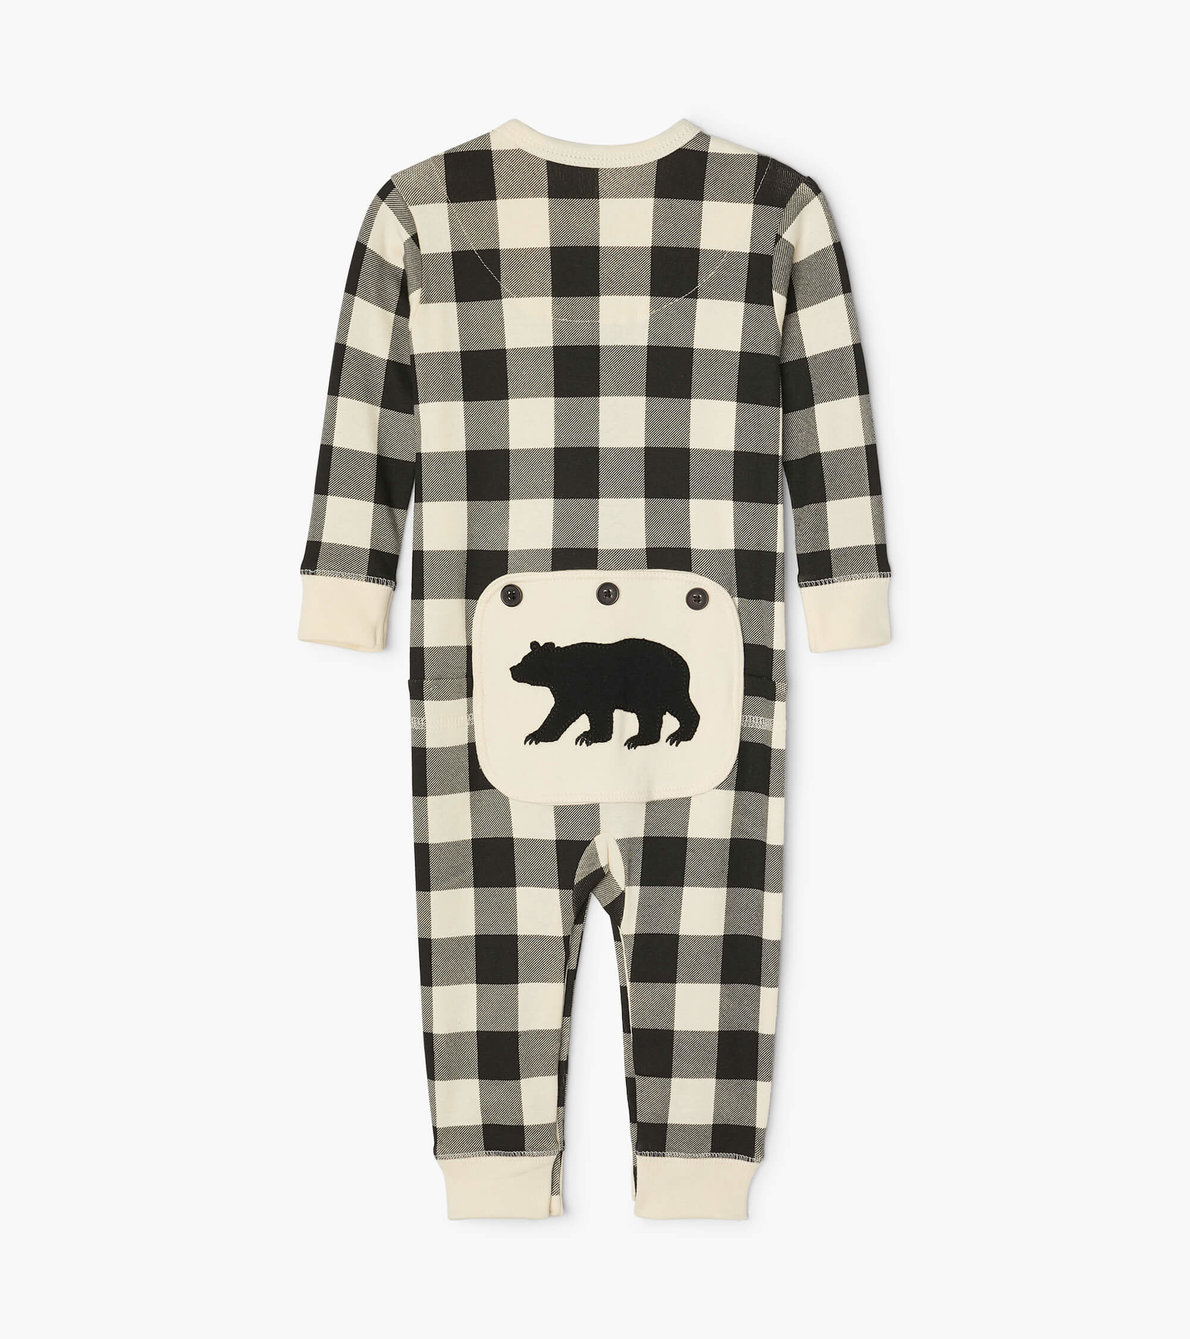 View larger image of Cream Plaid Baby Union Suit